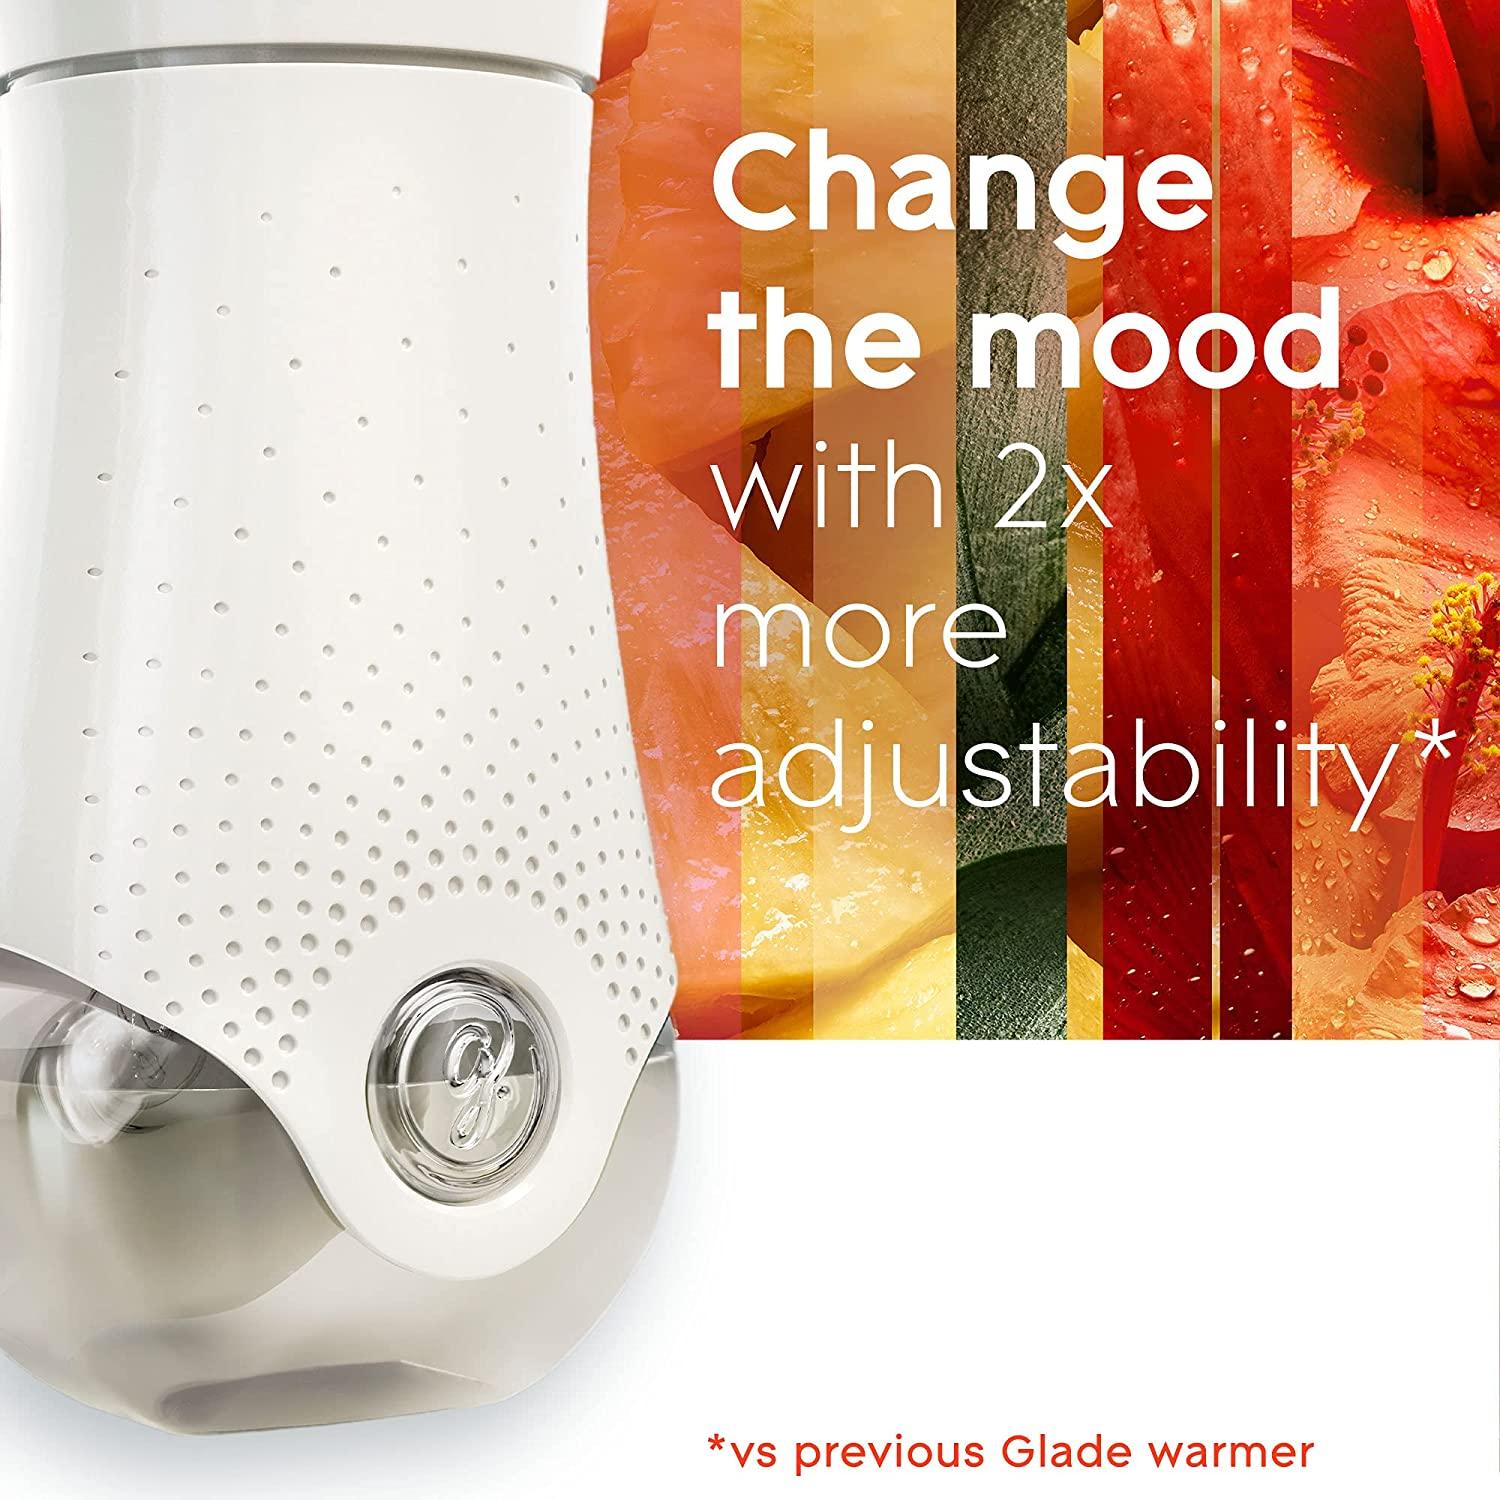 Glade Aromatherapy PlugIns Scented Oil Refills, Air Freshener